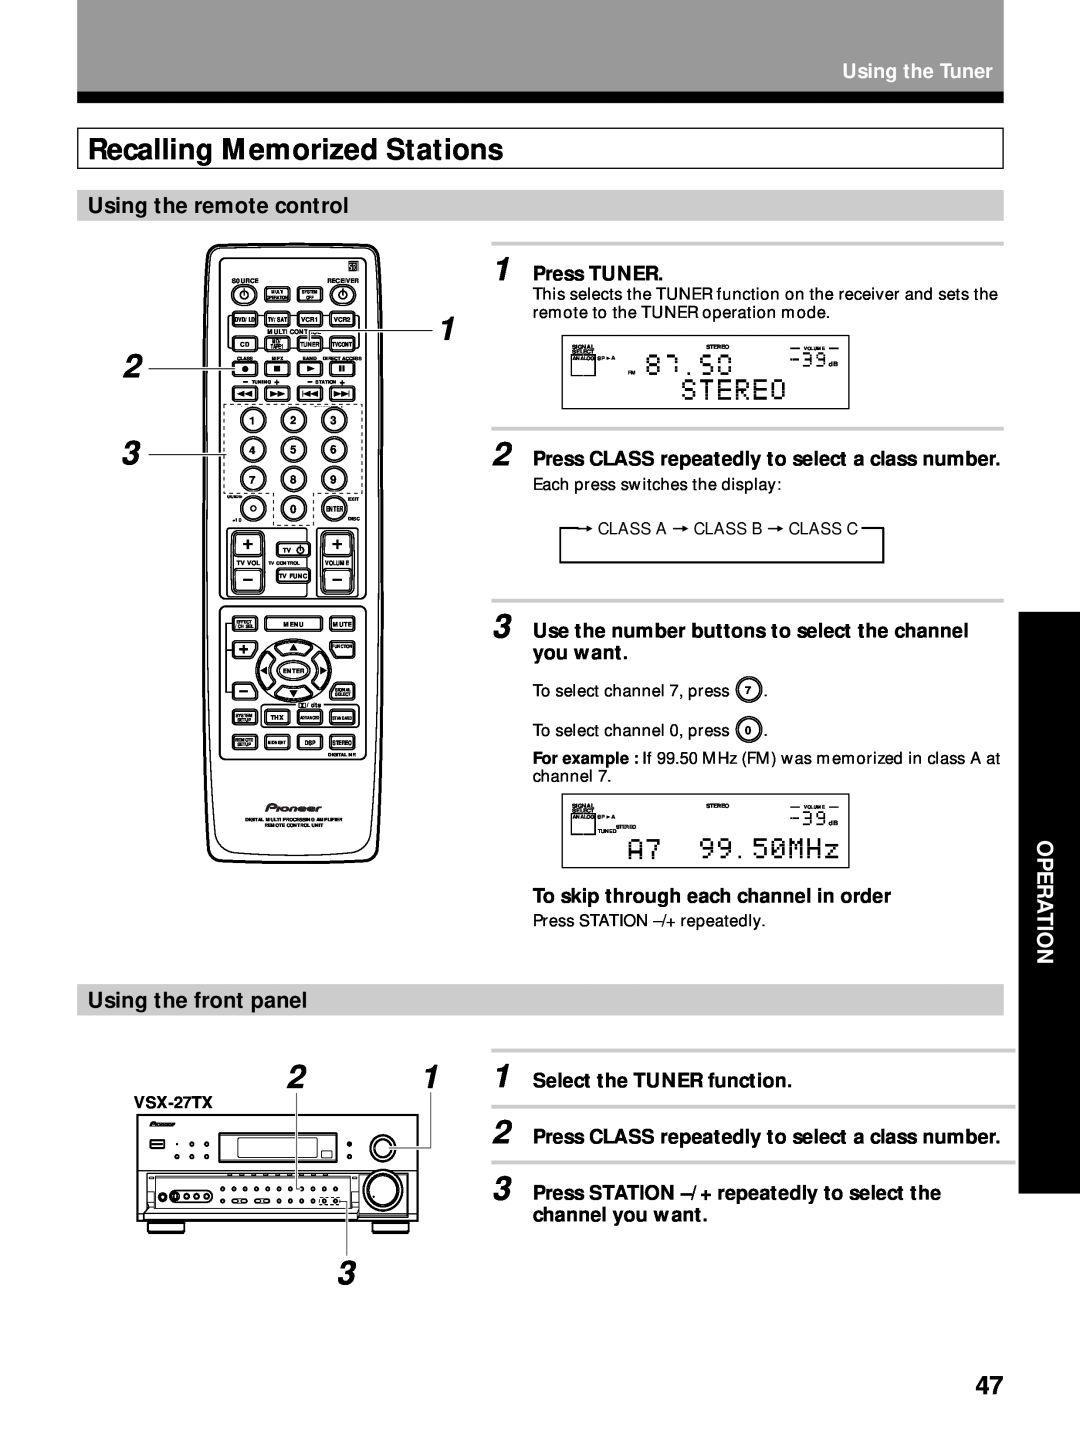 Pioneer VSX-24TX Recalling Memorized Stations, Using the remote control, Press TUNER, Select the TUNER function, Operation 